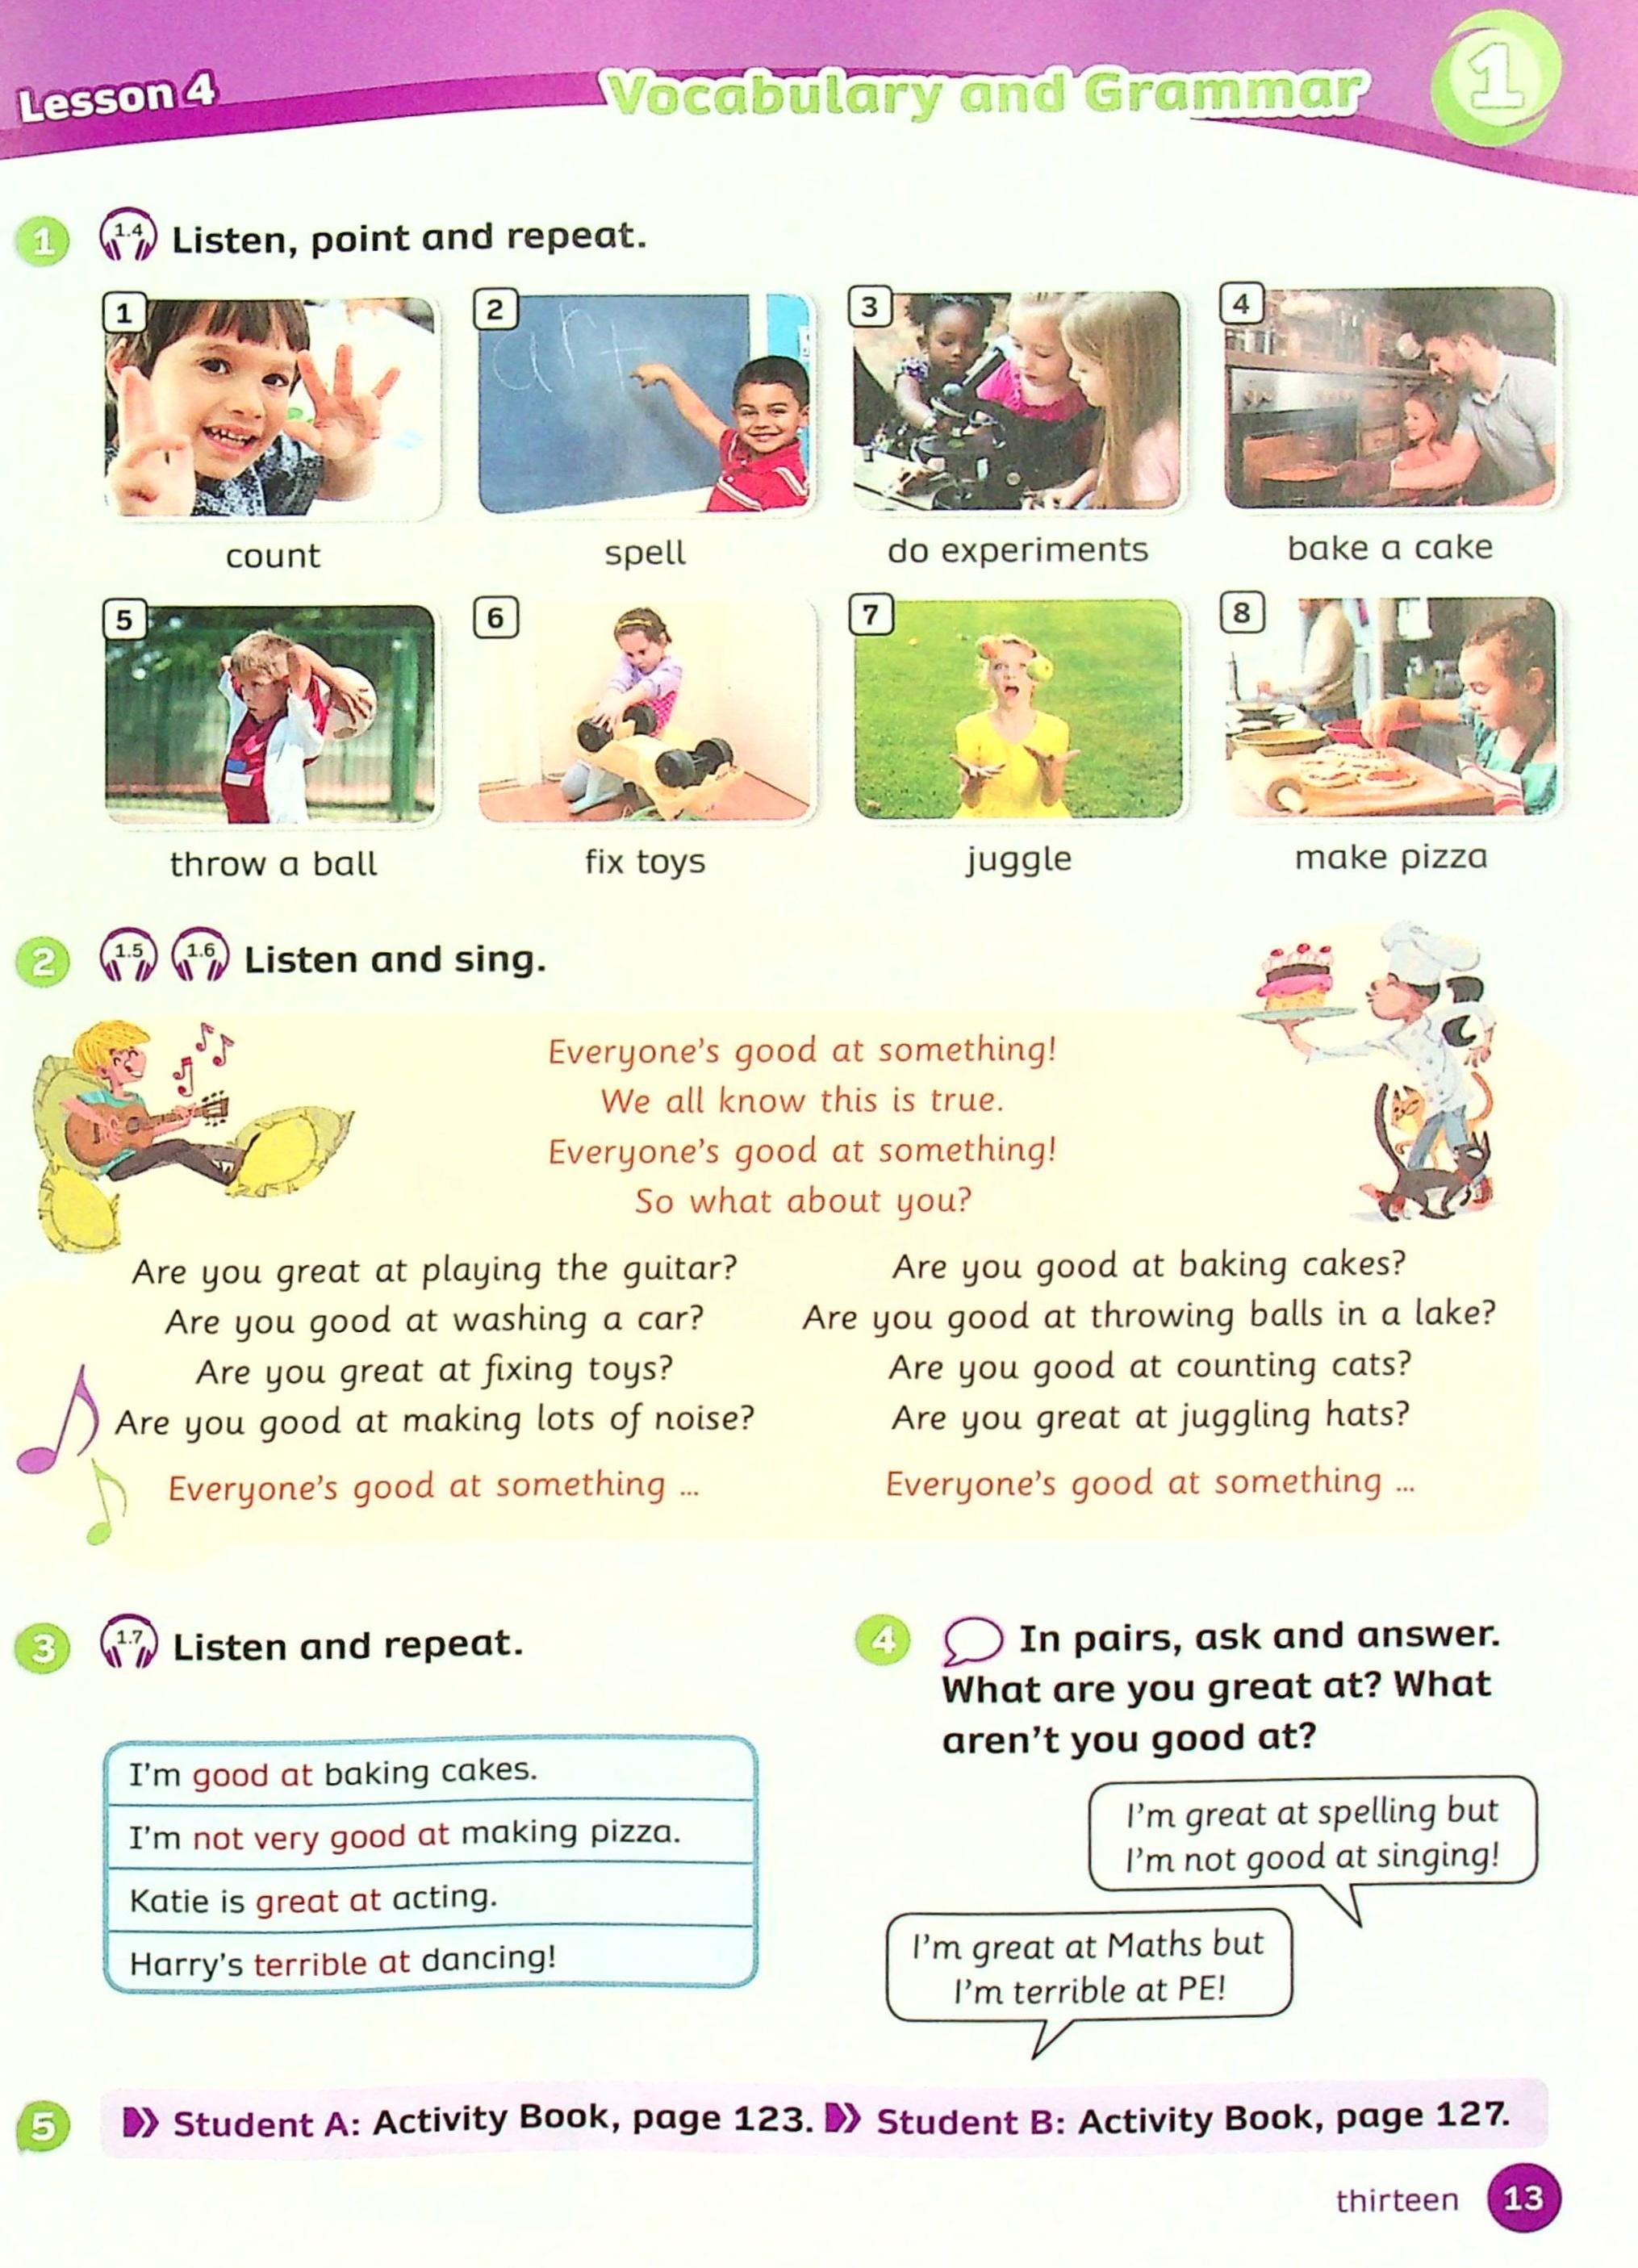 Team Together Pupil's Book With Digital Resources Pack Level 4